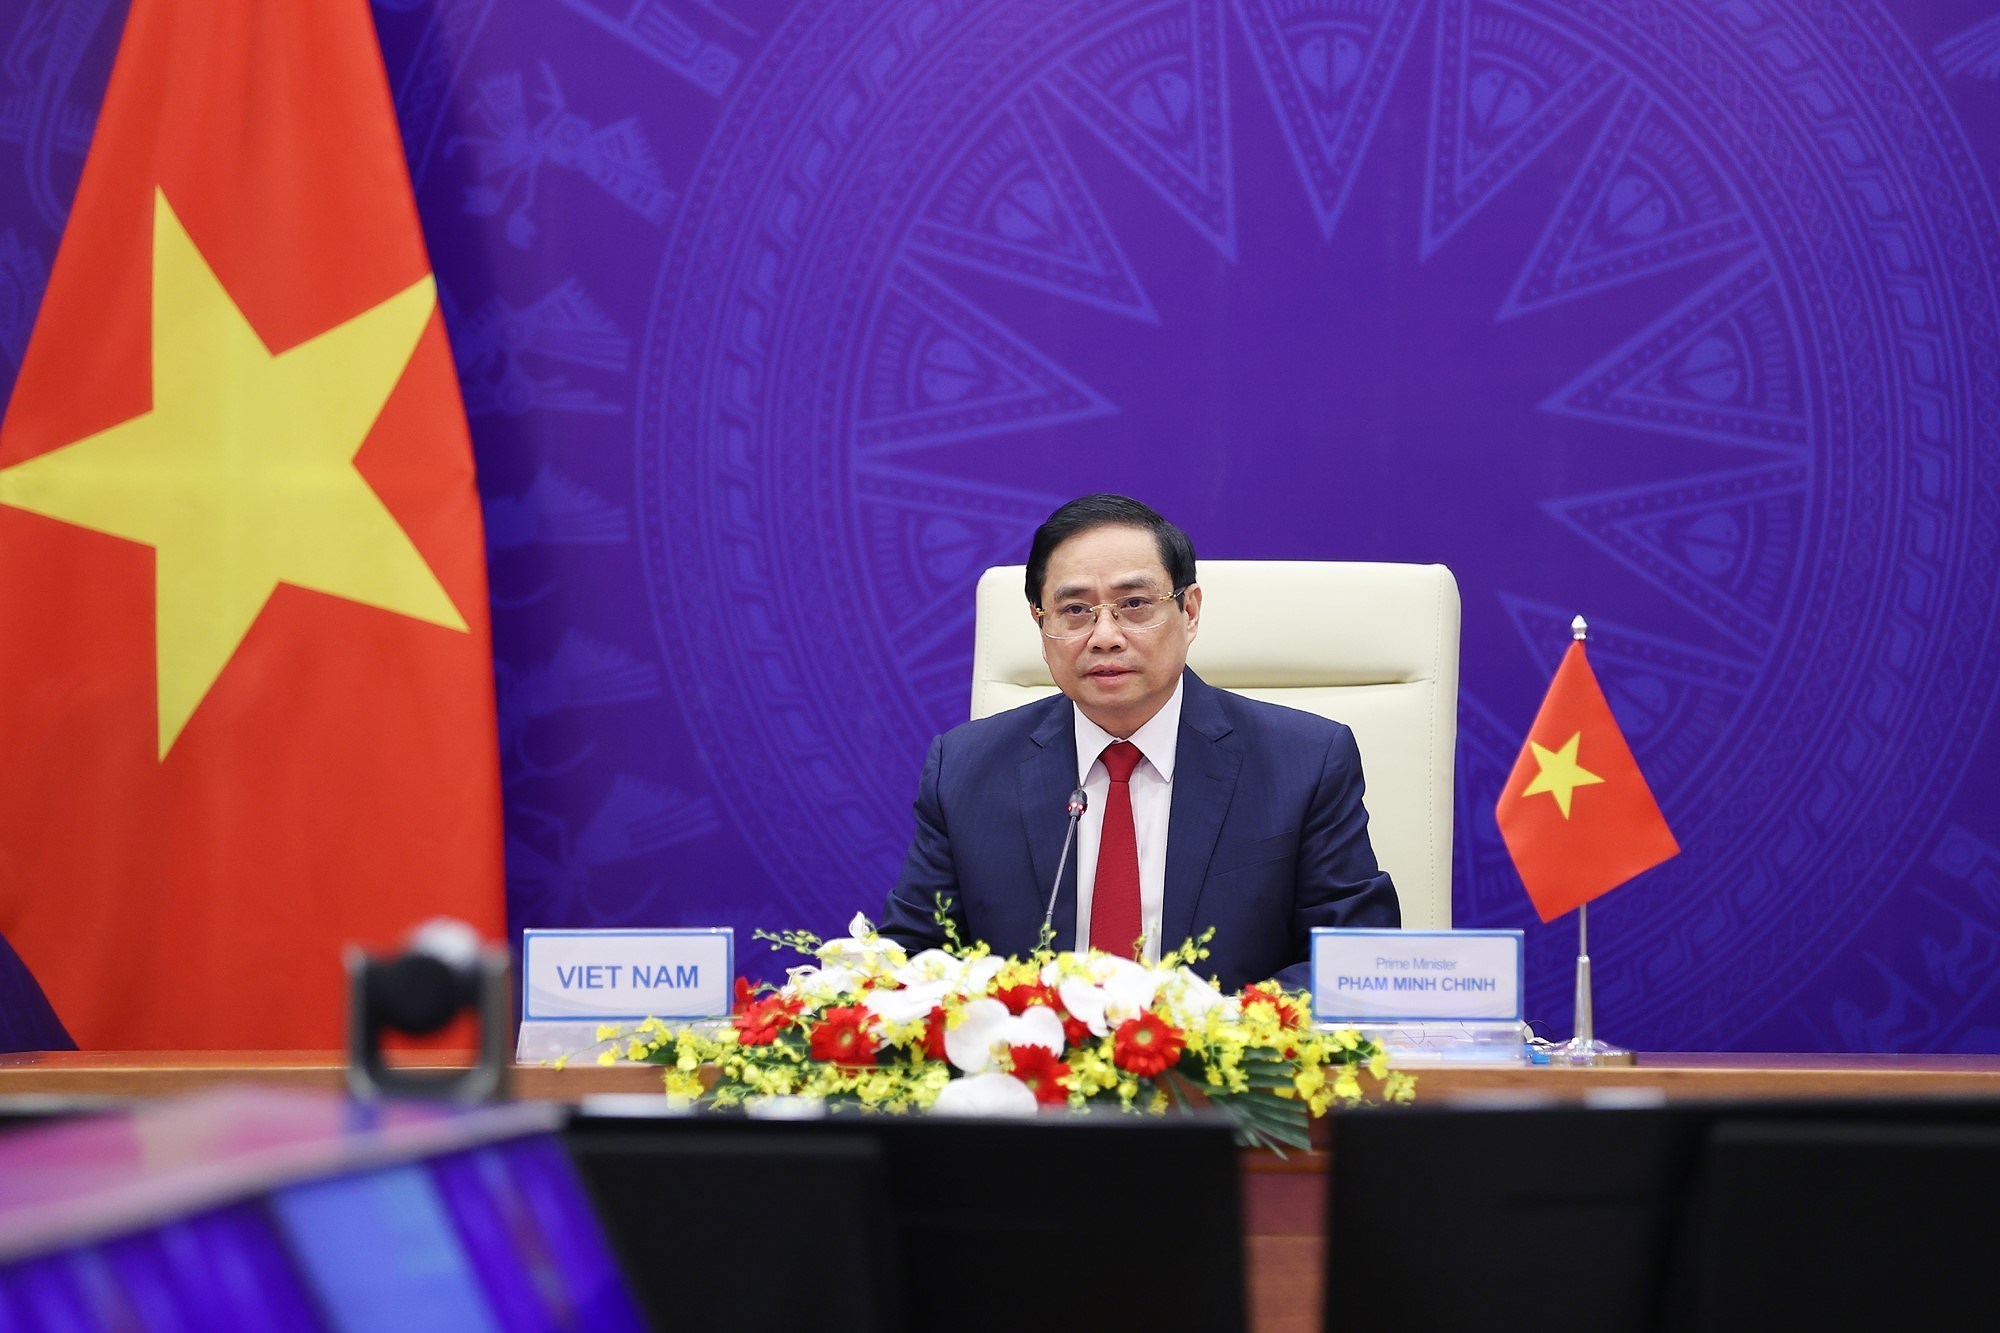 Prime Minister delivers speech at 26th int’l conference on future of Asia hinh anh 1